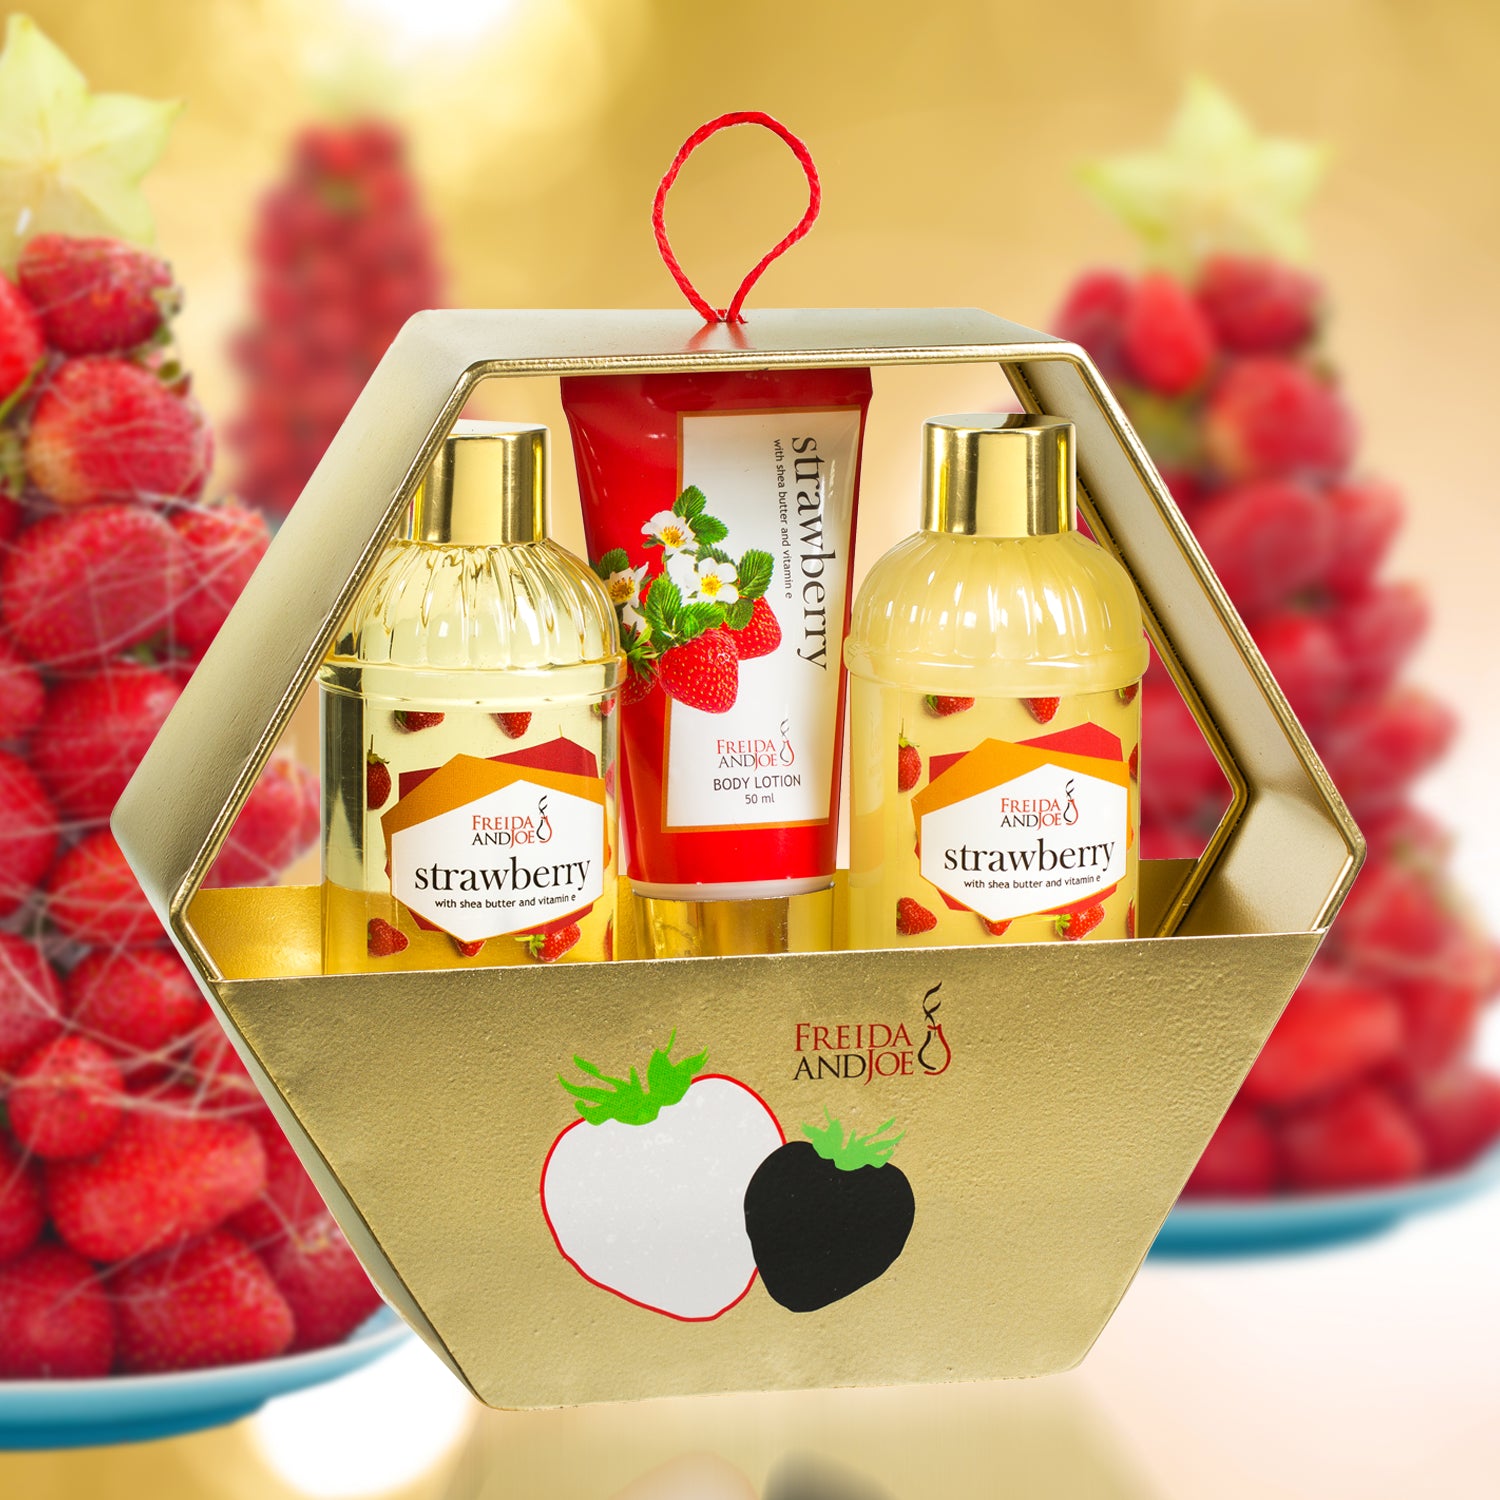 Strawberry Holiday Gift Set Gold Hexagon Box, Includes Shower Gel, Bub